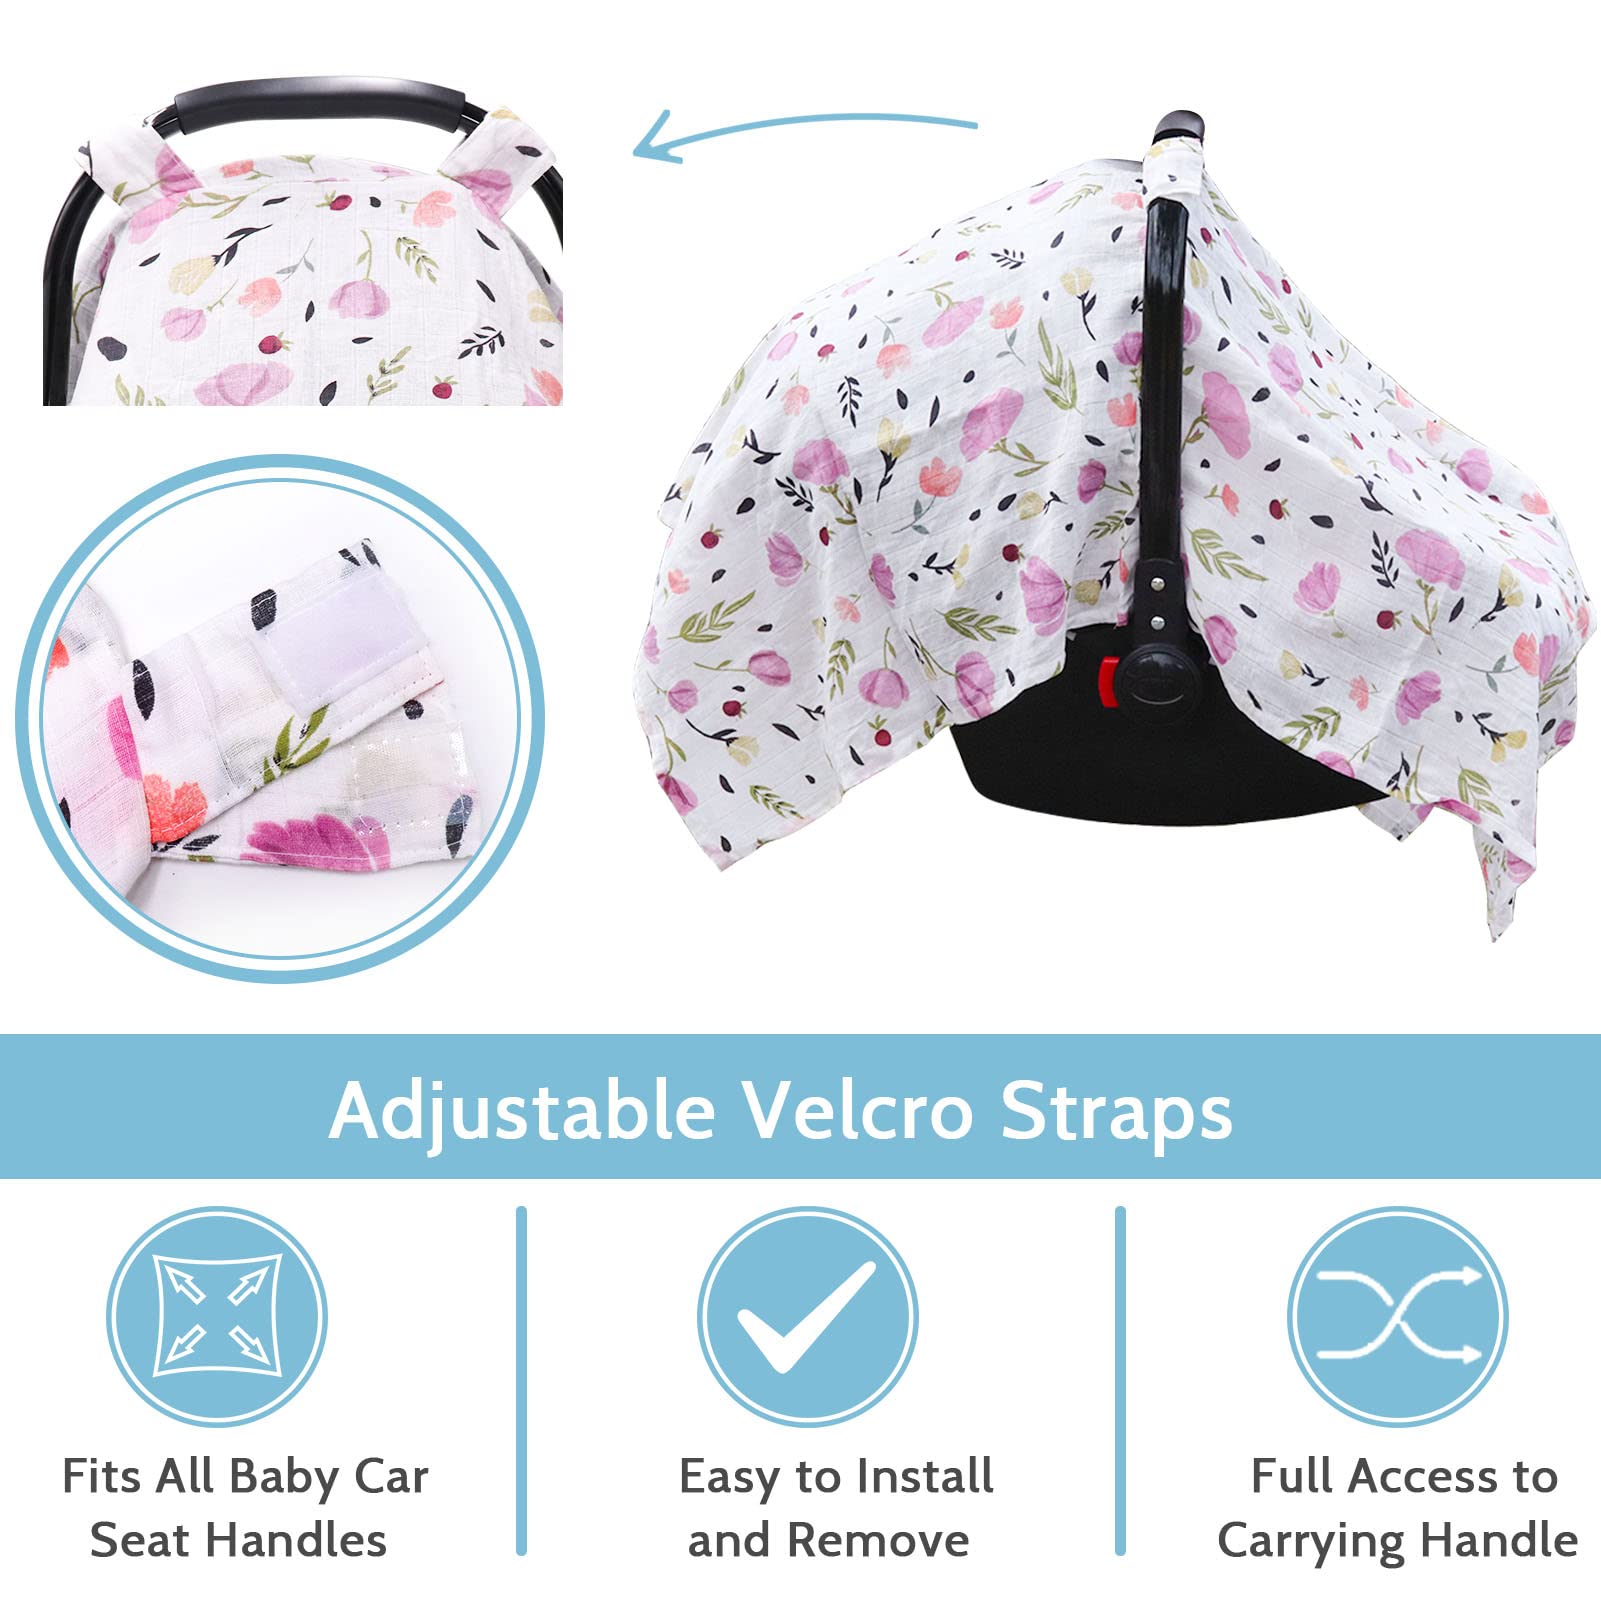 Muslin Baby Car Seat Cover for Boys Girls, Infant Car Seat Canopy, Summer Car Seat Tent Lightweight Breathable, Pink Flower